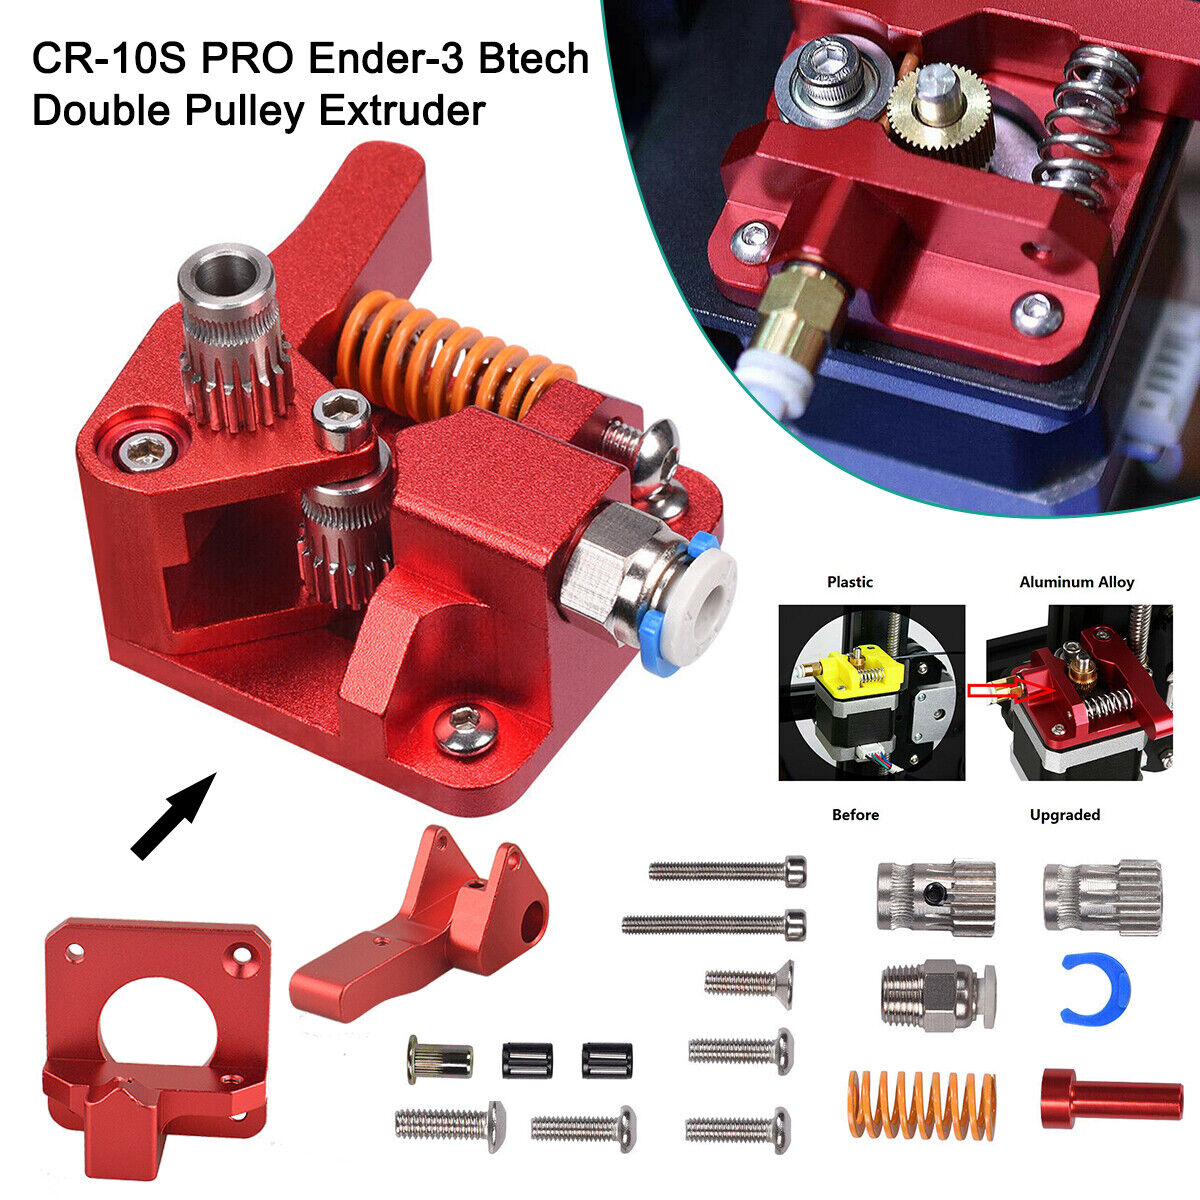 Dual Gear Pulley Drive Extruder Kit Aluminum for 3D Printer CR-10S Pro Ender-3